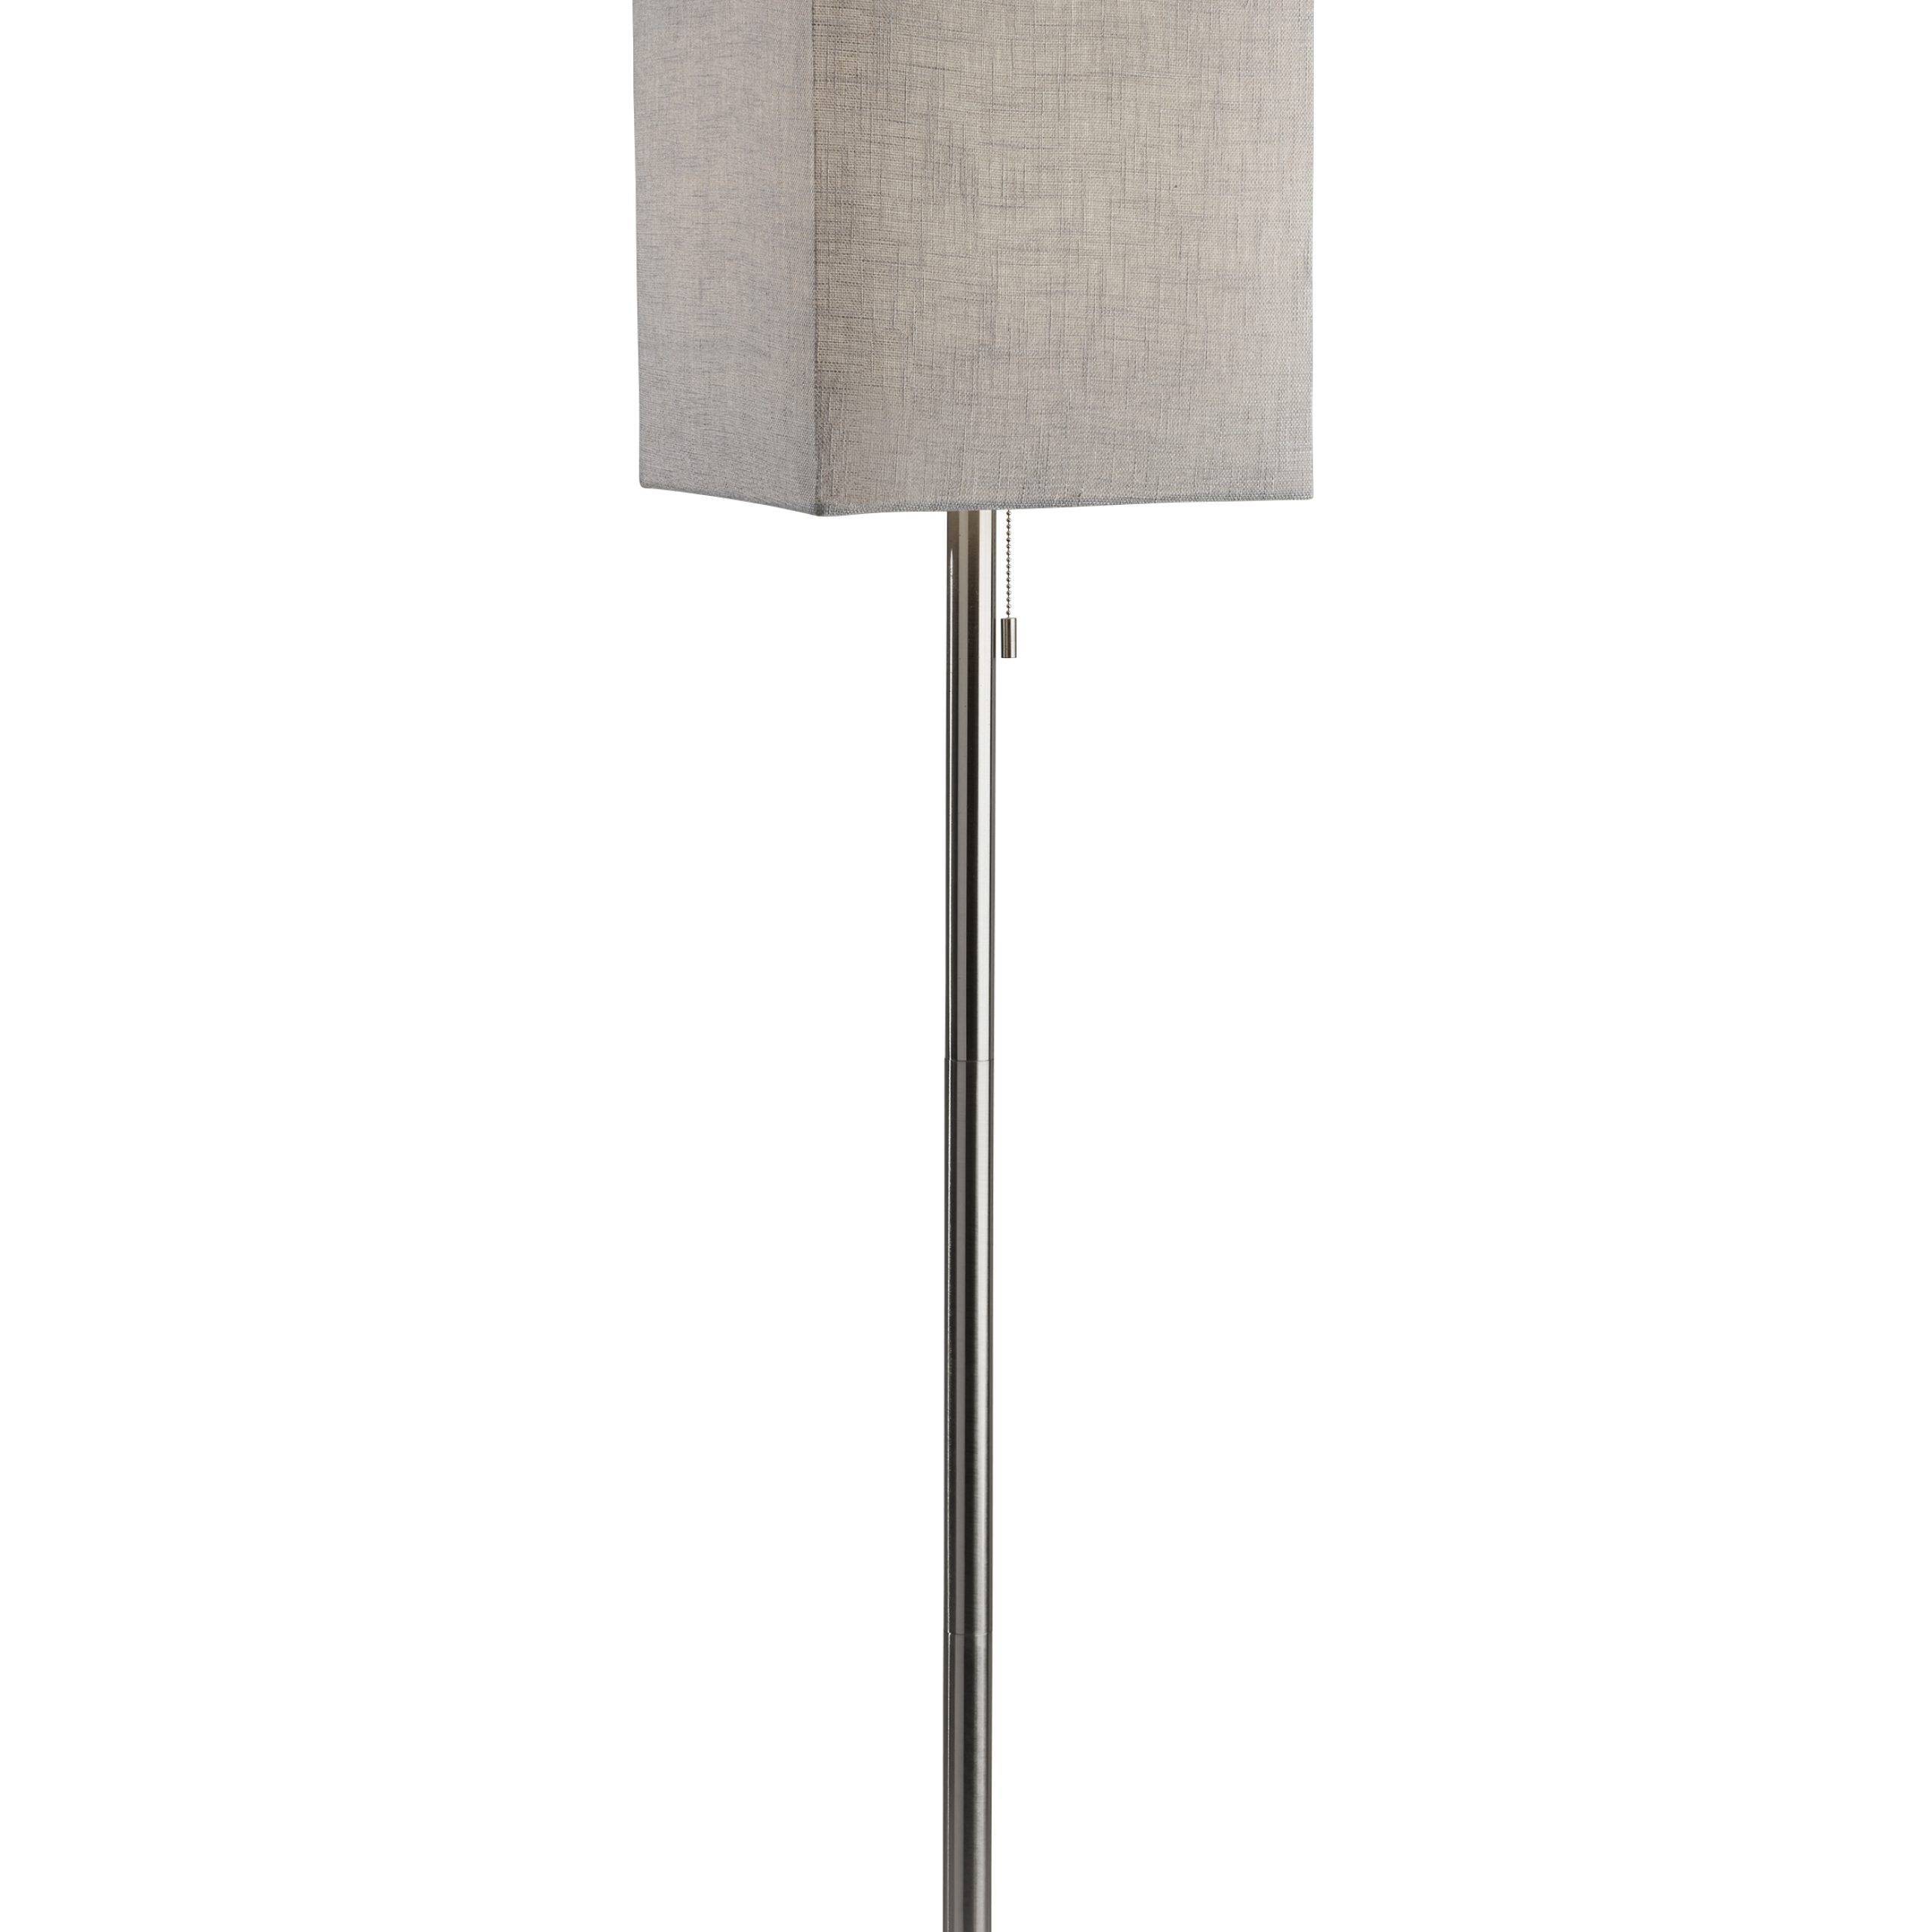 Adesso Estelle Floor Lamp, Brushed Steel, Light Grey Textured Fabric Shade  – Walmart Within Grey Textured Floor Lamps (View 2 of 20)